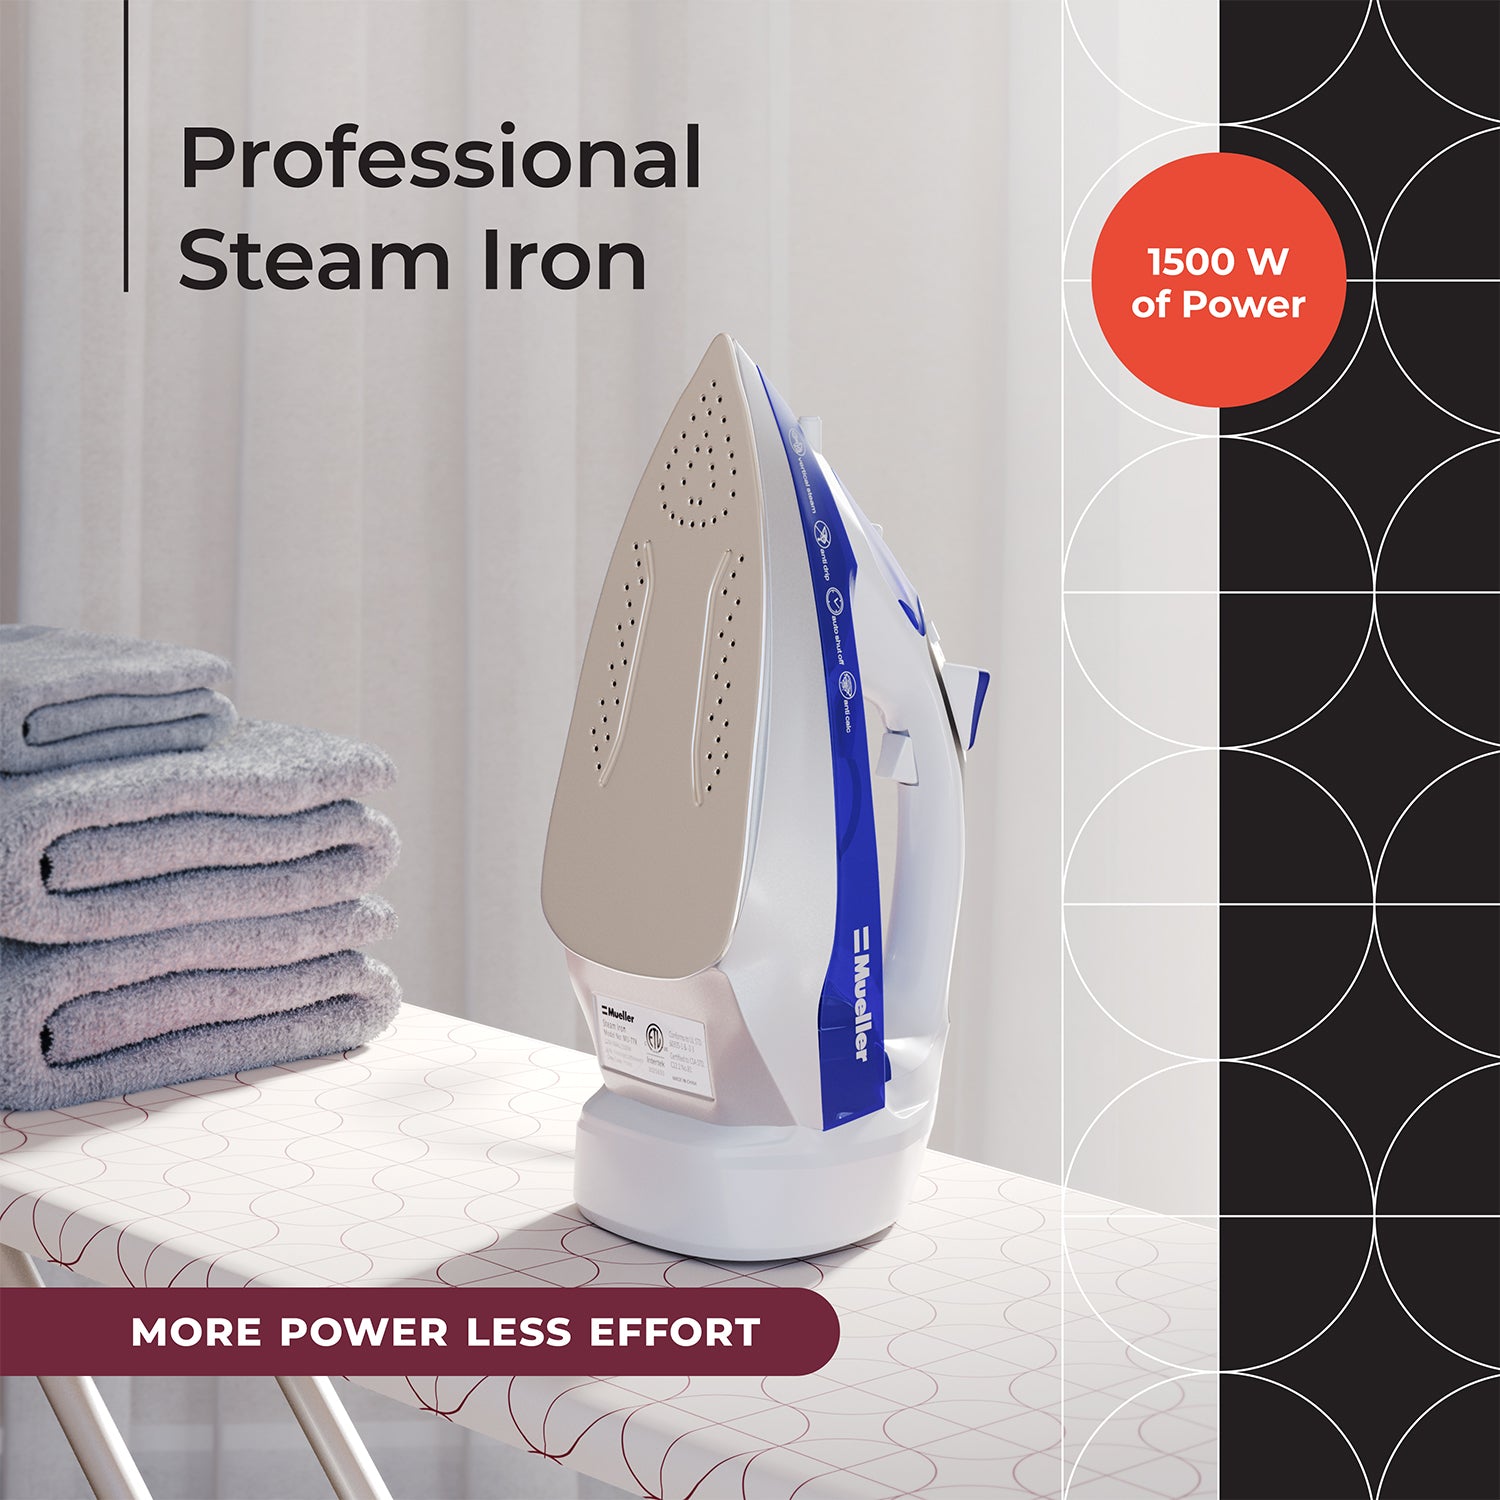 Steamer vs. Iron: Which Is Better?